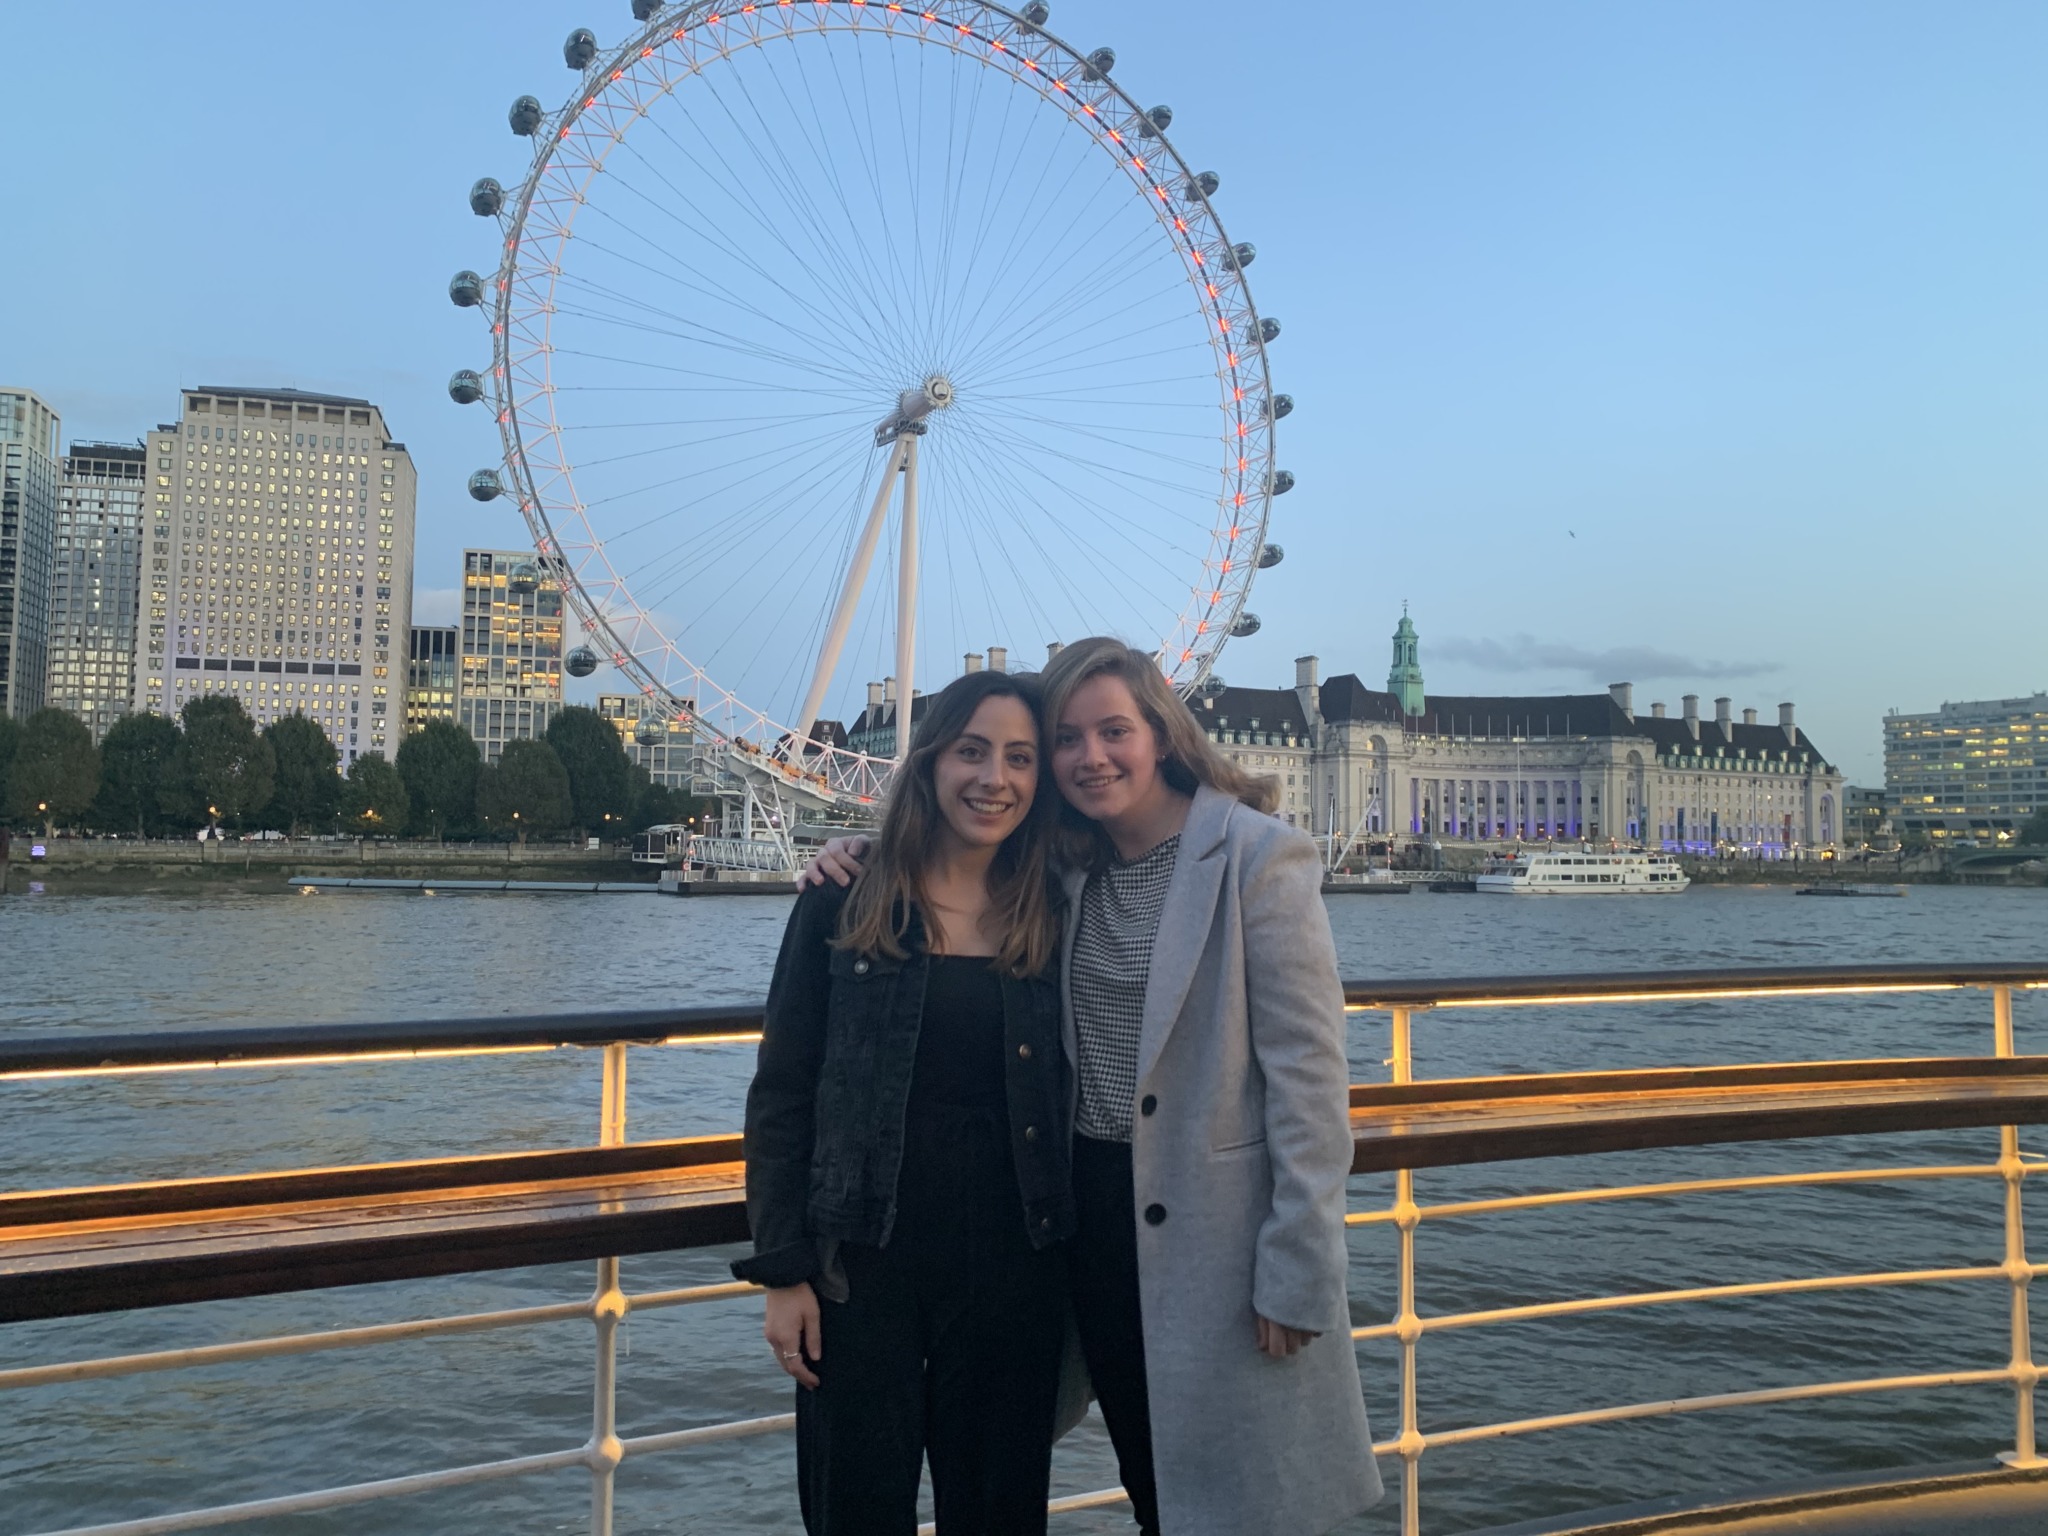 Antonia and her friend stand in front of the Thames river overlooking the London Eye